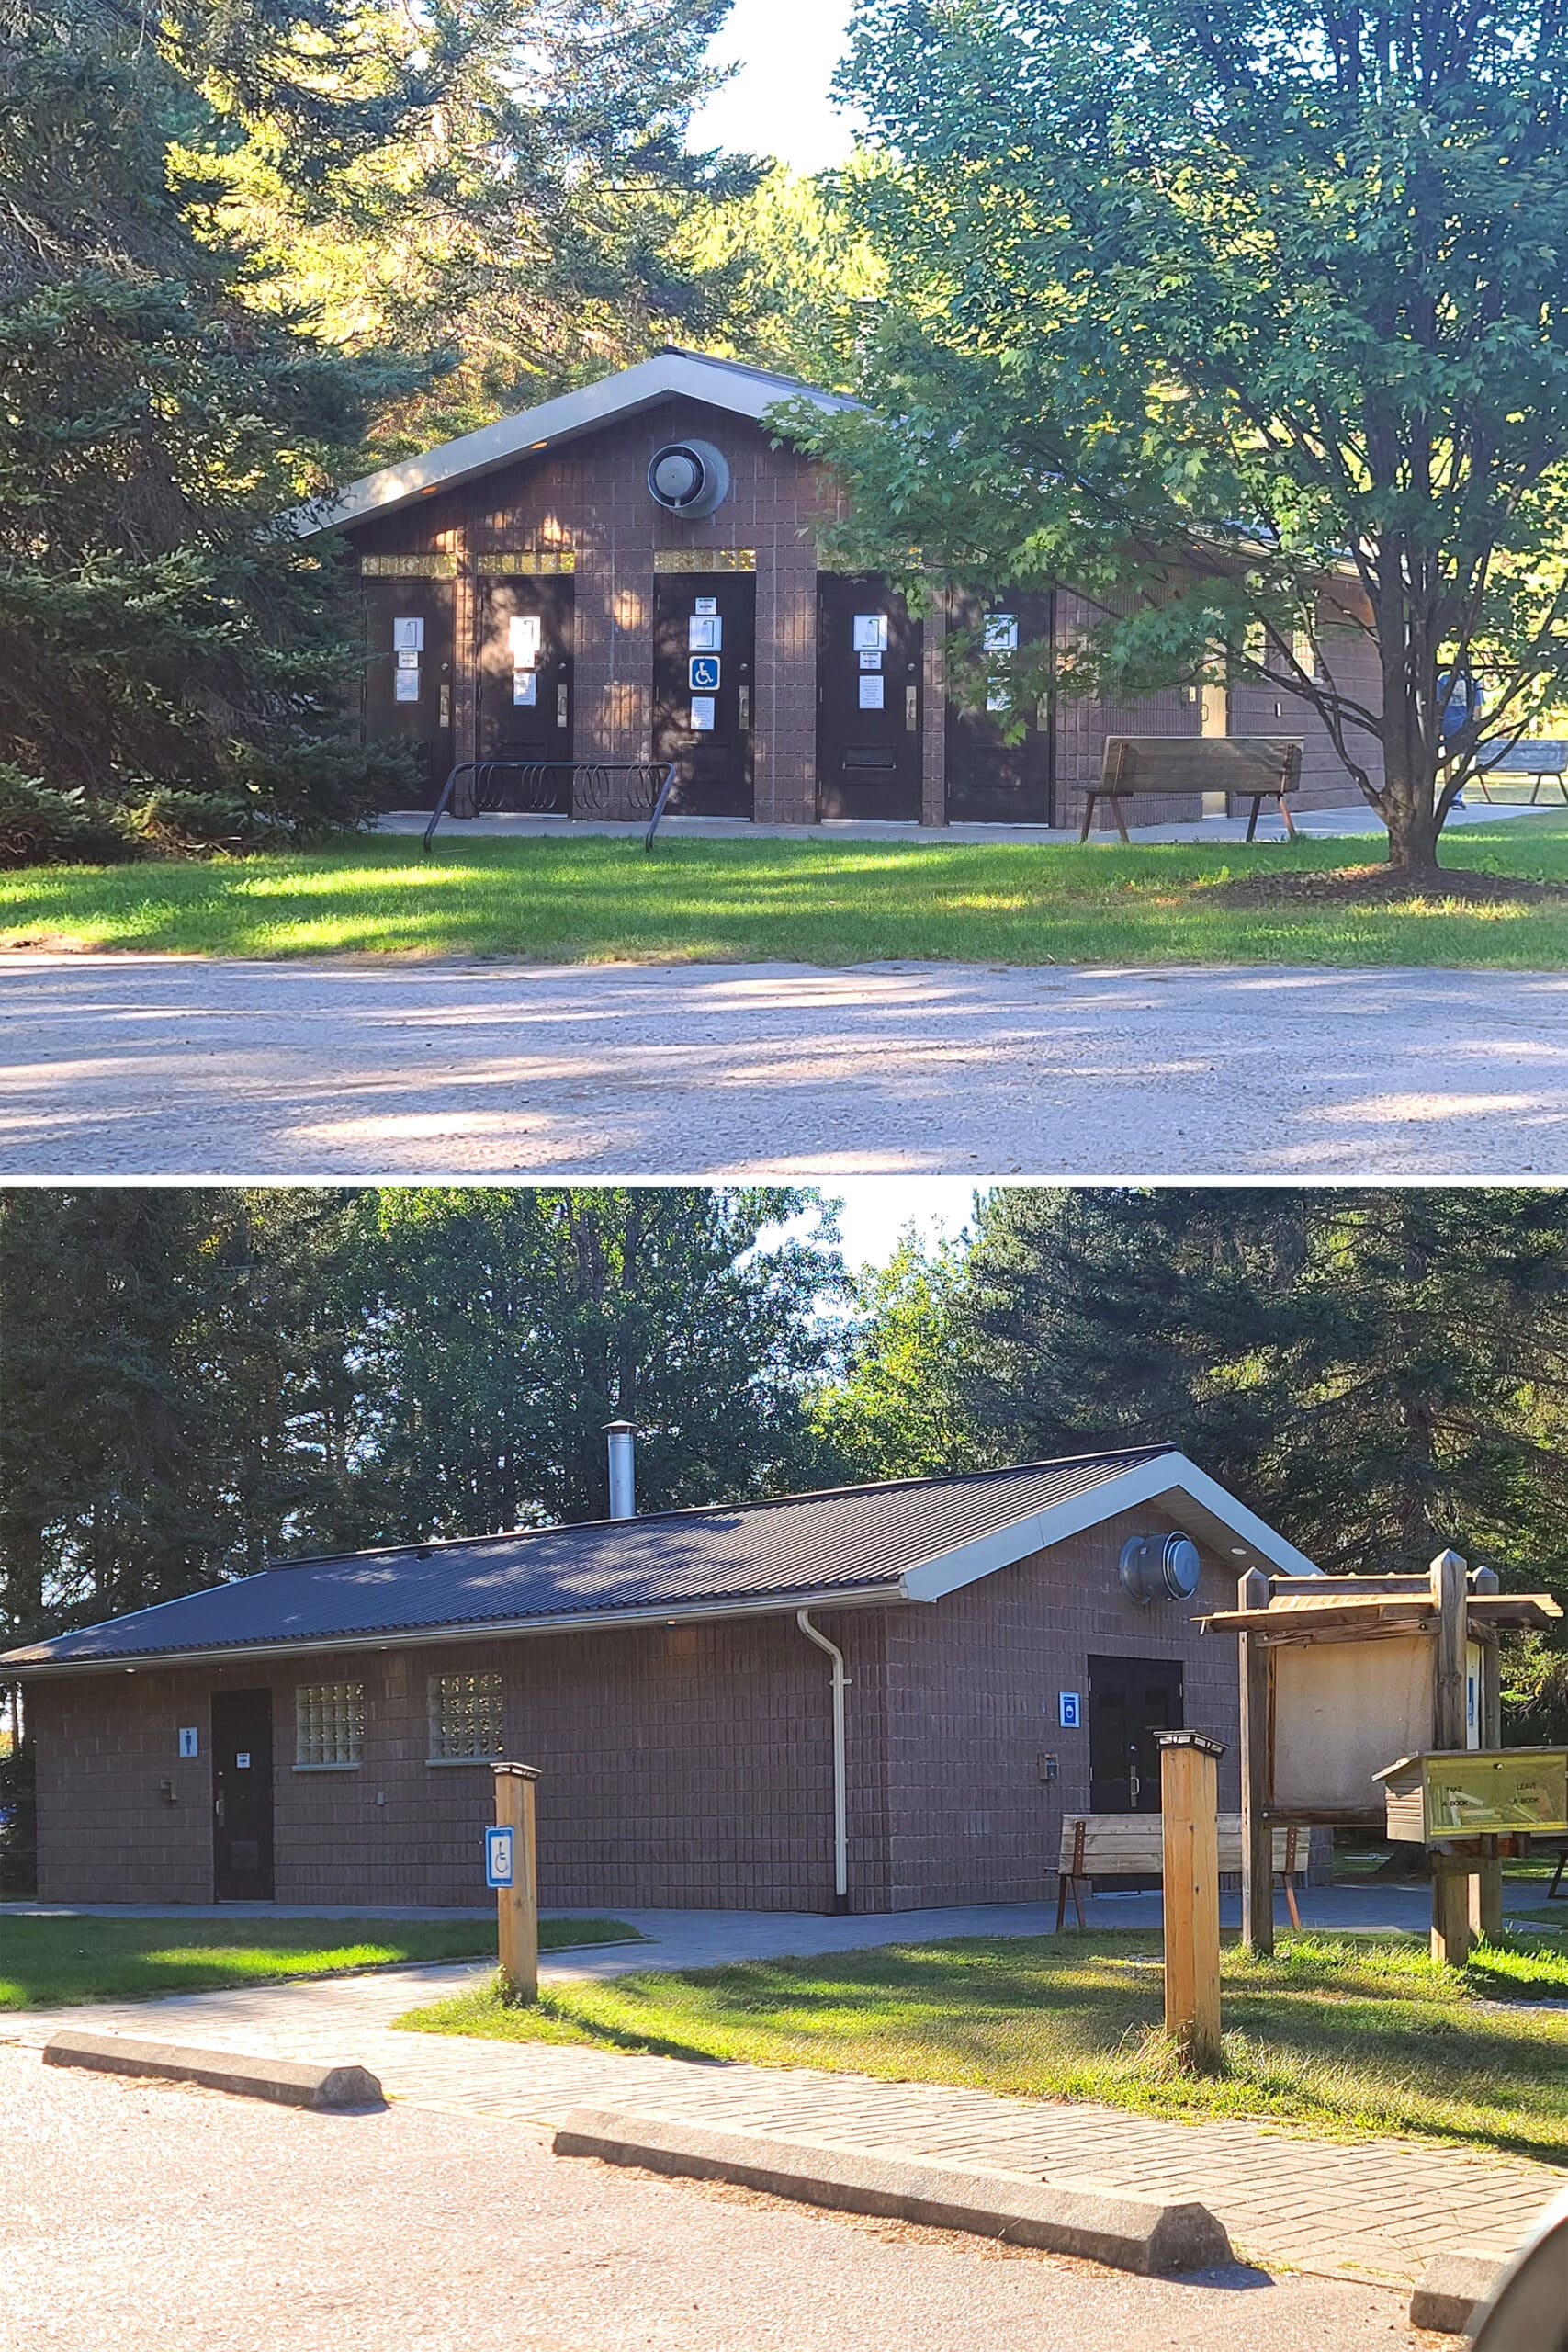 2 part image showing the front and back of the comfort station at Chutes provincial park.